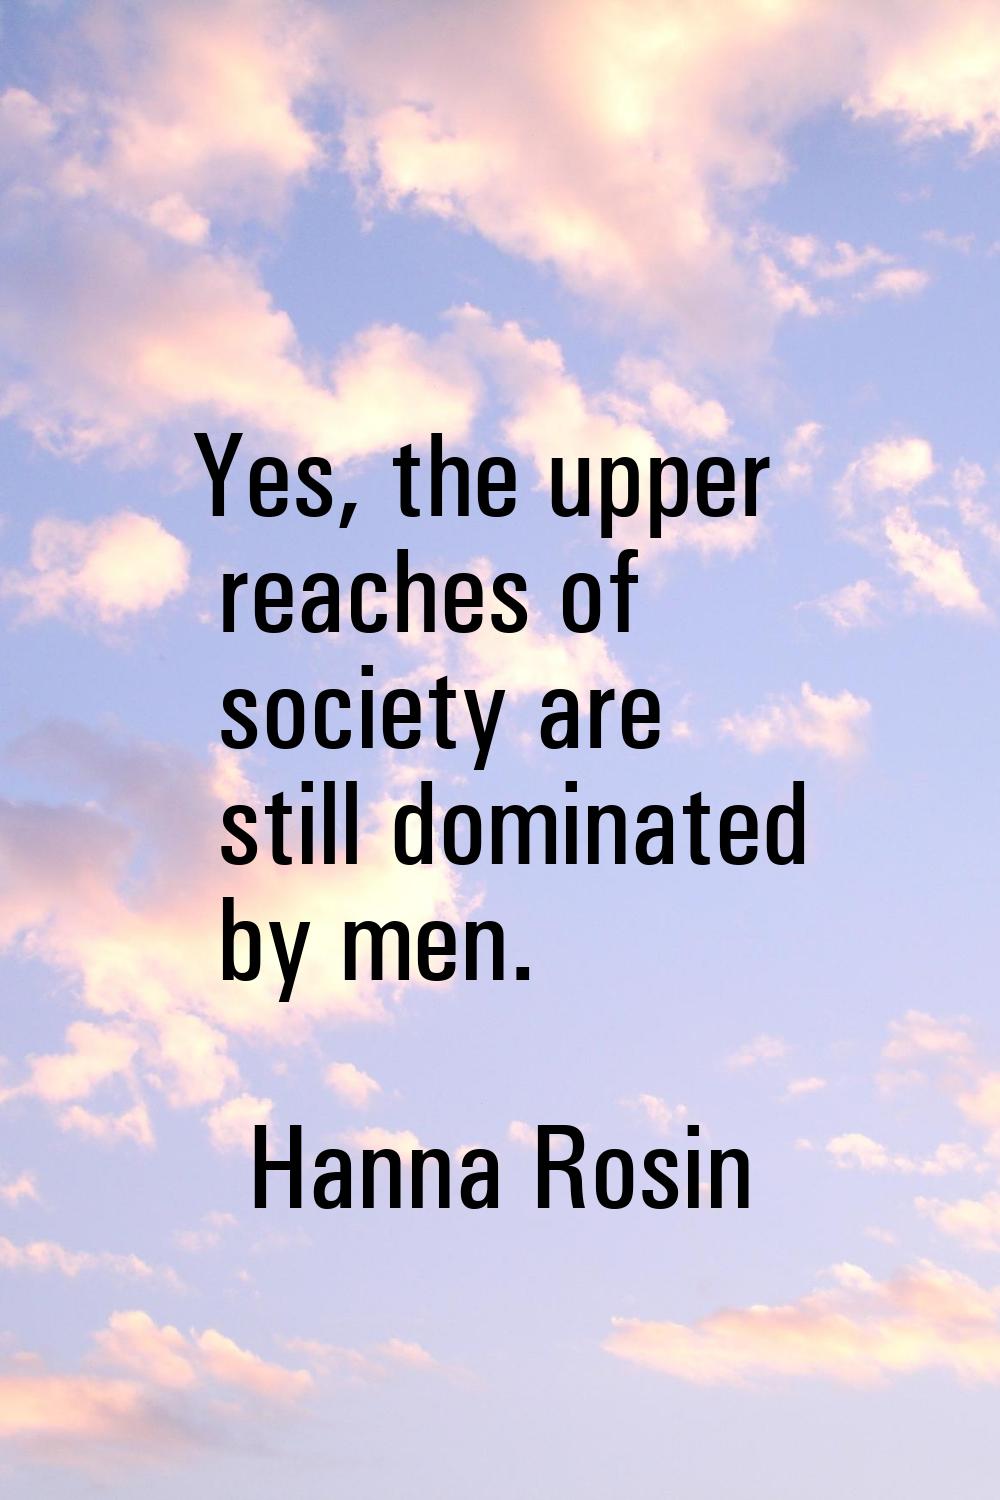 Yes, the upper reaches of society are still dominated by men.